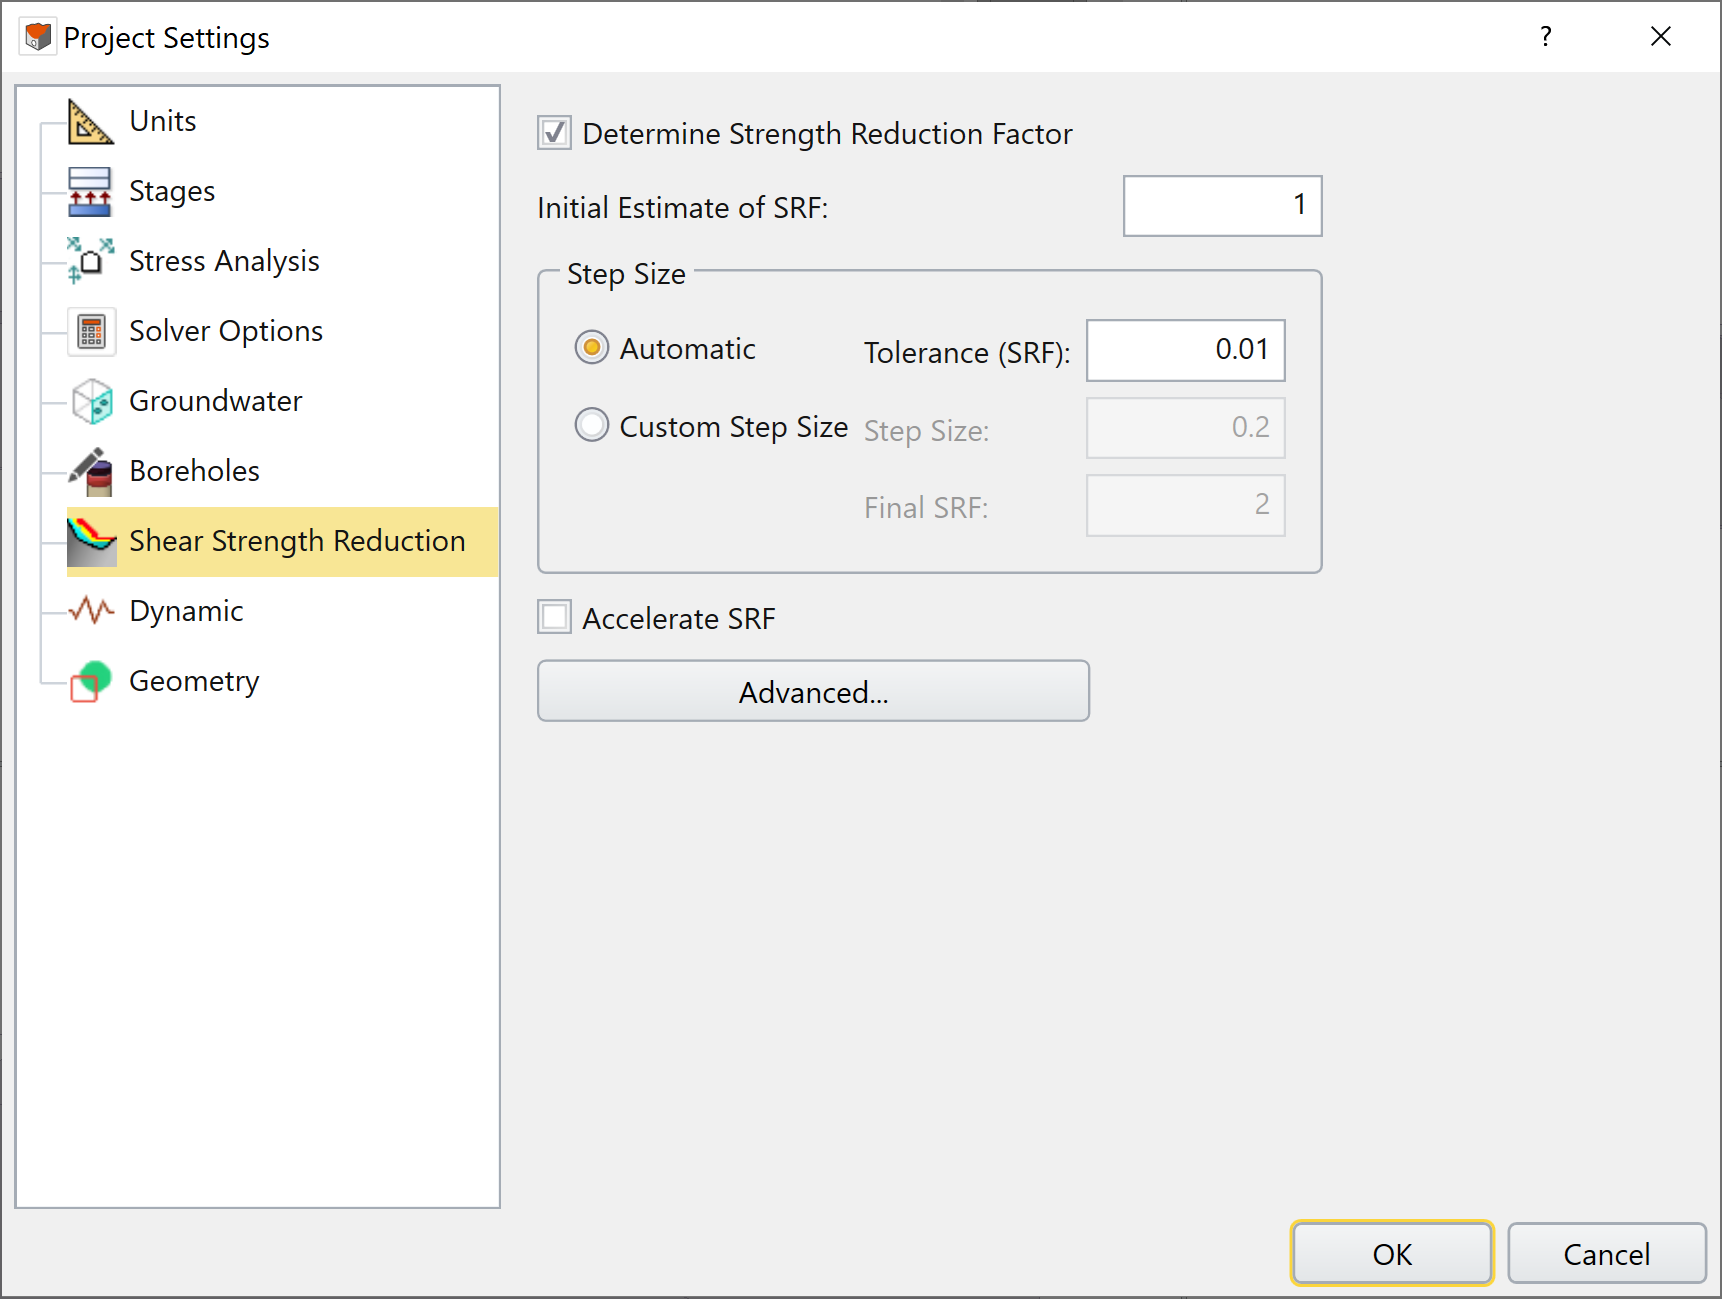 Shear Strength Reduction tab in Project Settings